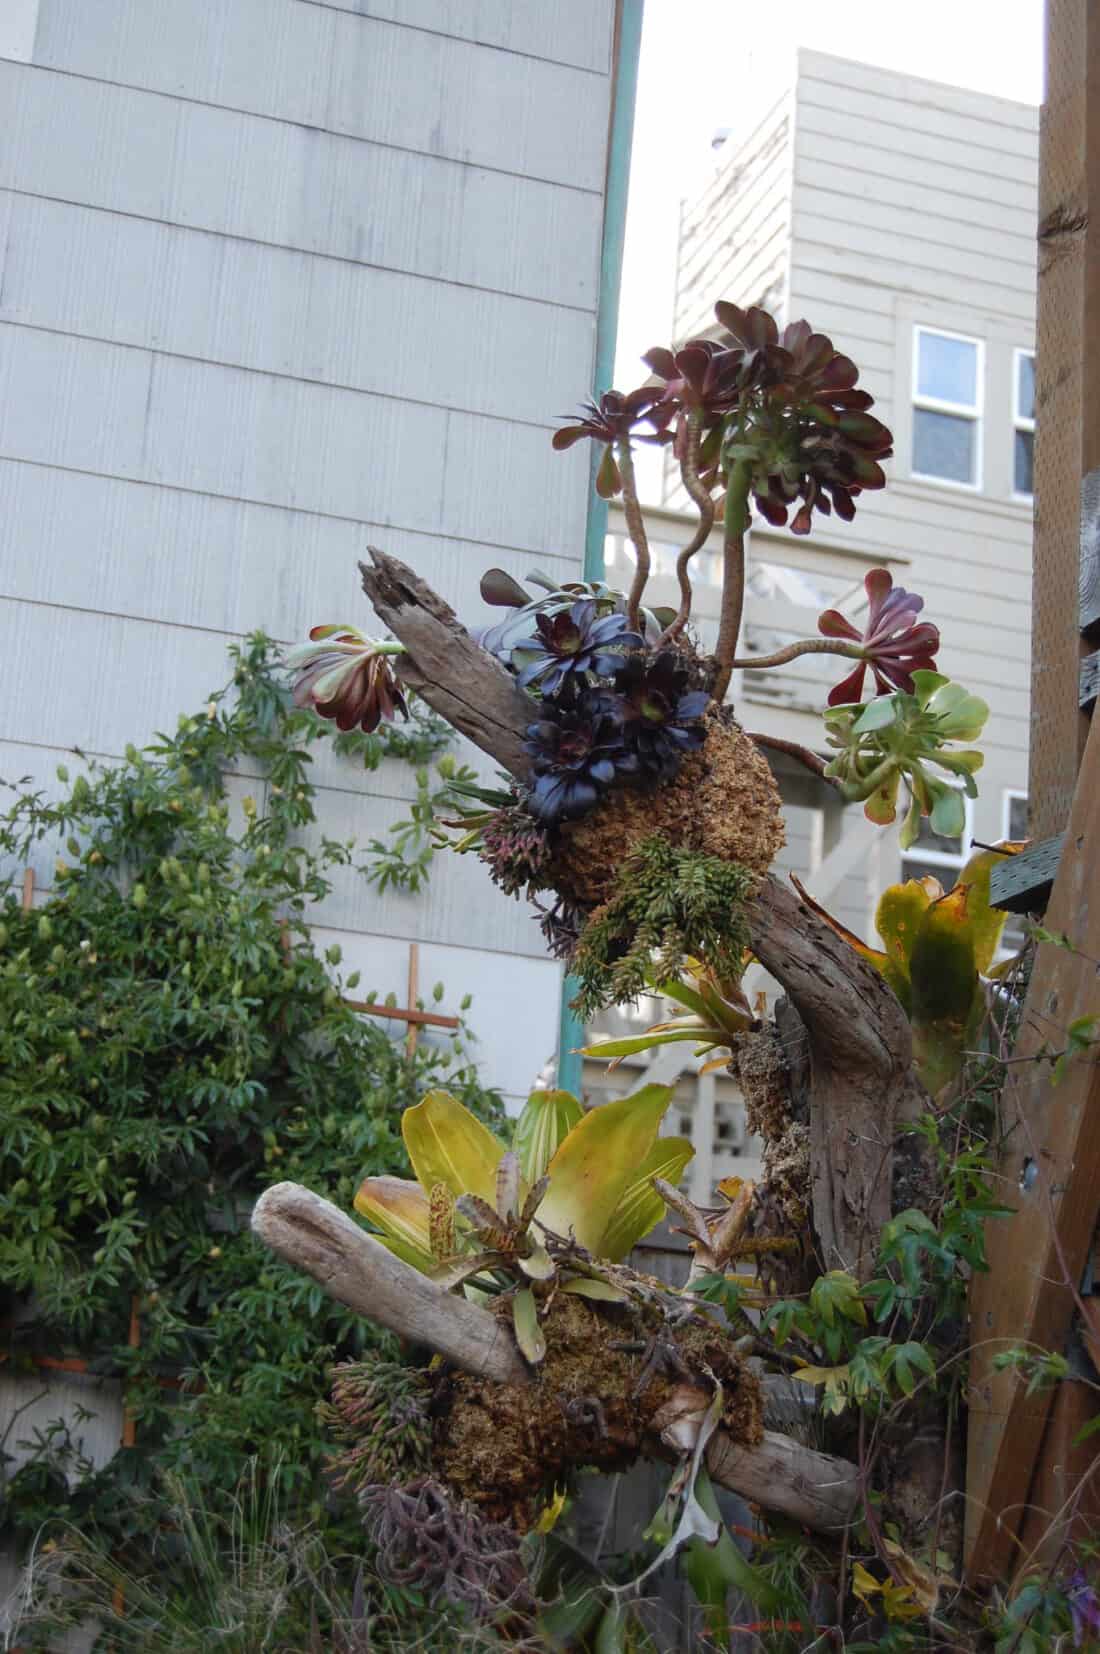 A vibrant succulent garden scene featuring an artistic arrangement of succulent plants growing on an old, gnarled tree trunk, with residential buildings in the background.